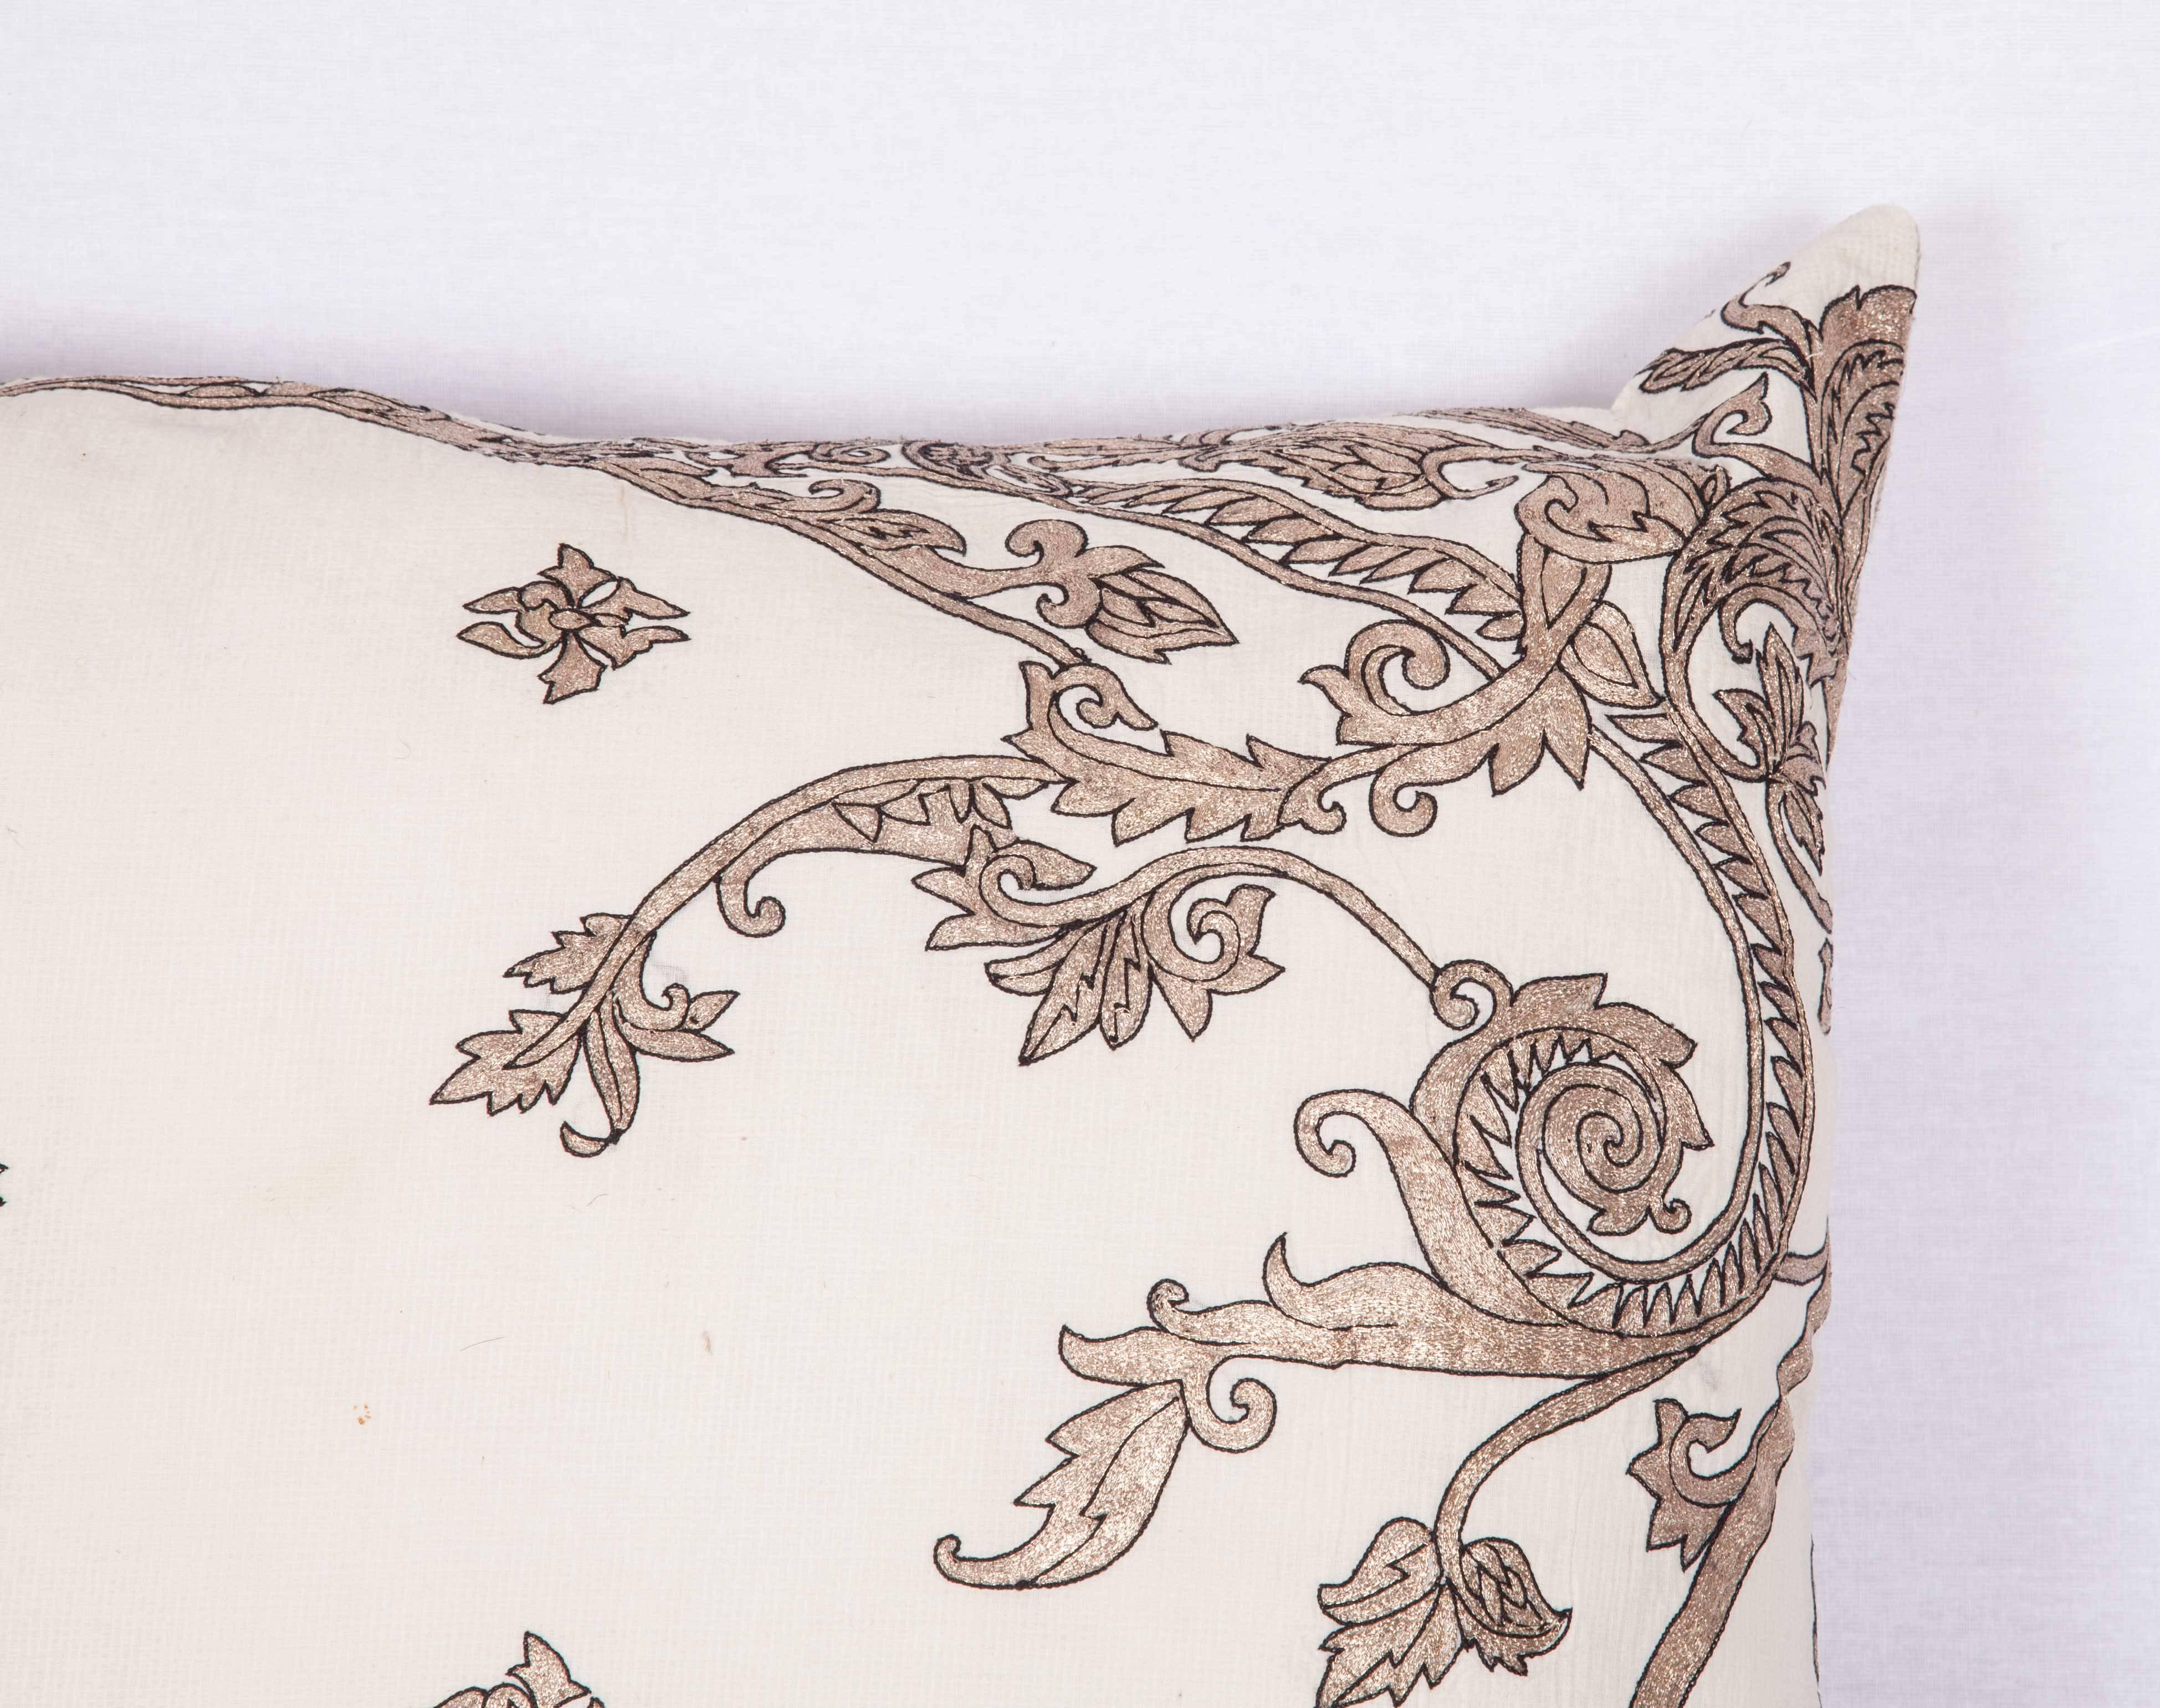 Suzani Antique Pillow Made Out of a 19th Century or Earlier European Silver Embroidery